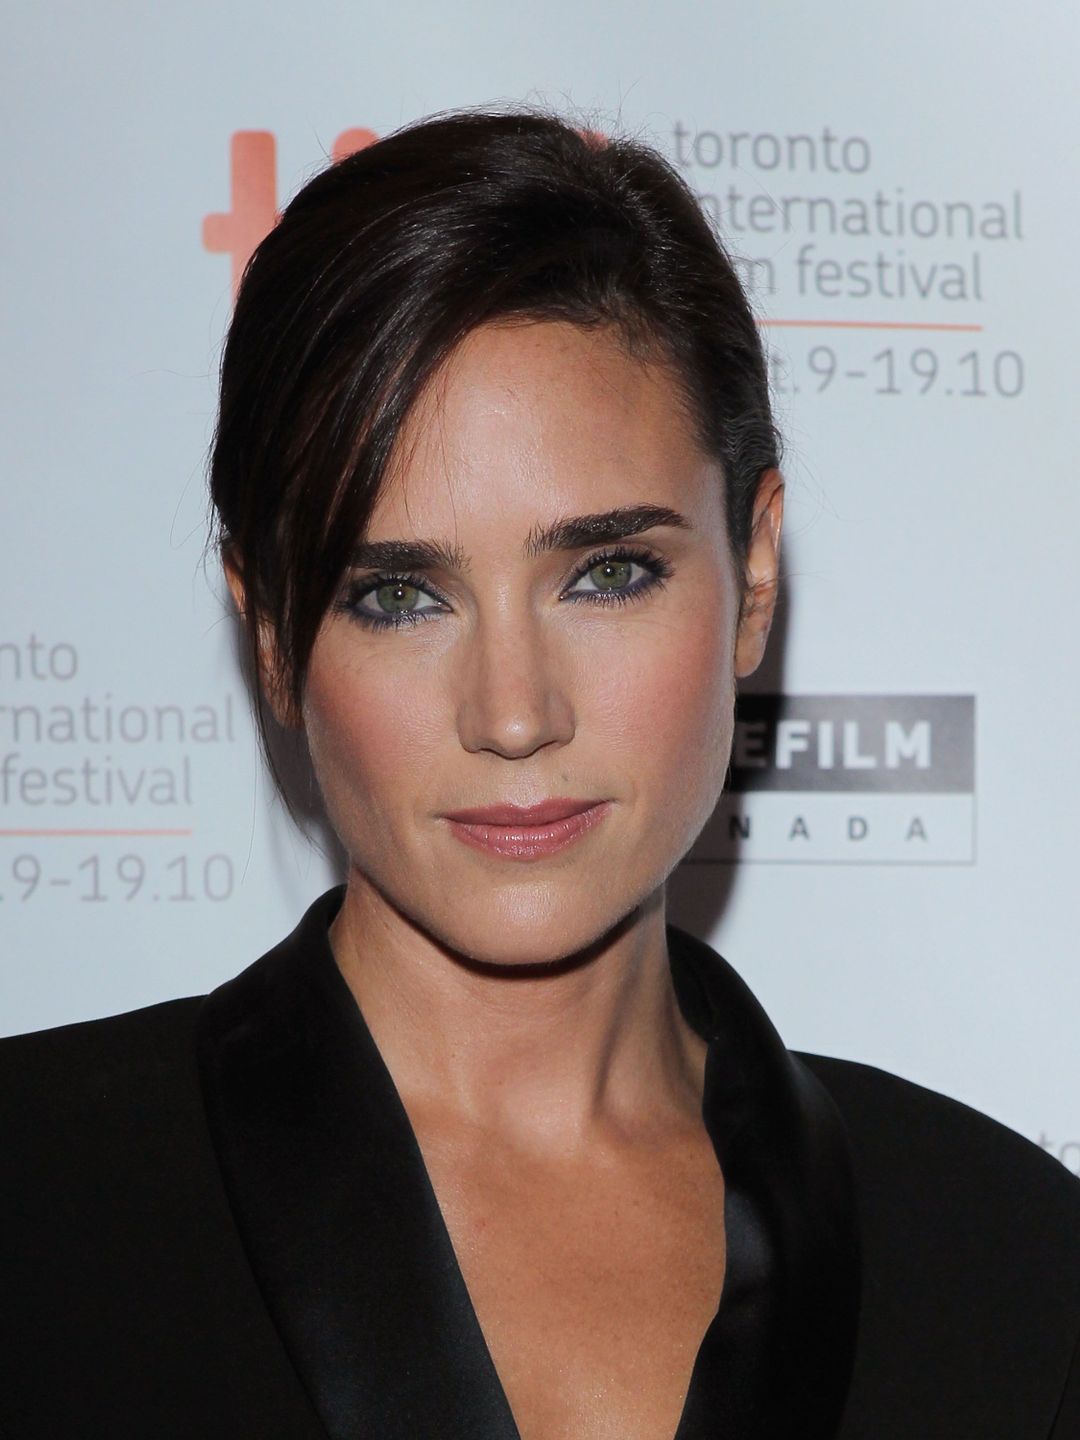 Jennifer Connelly personal traits